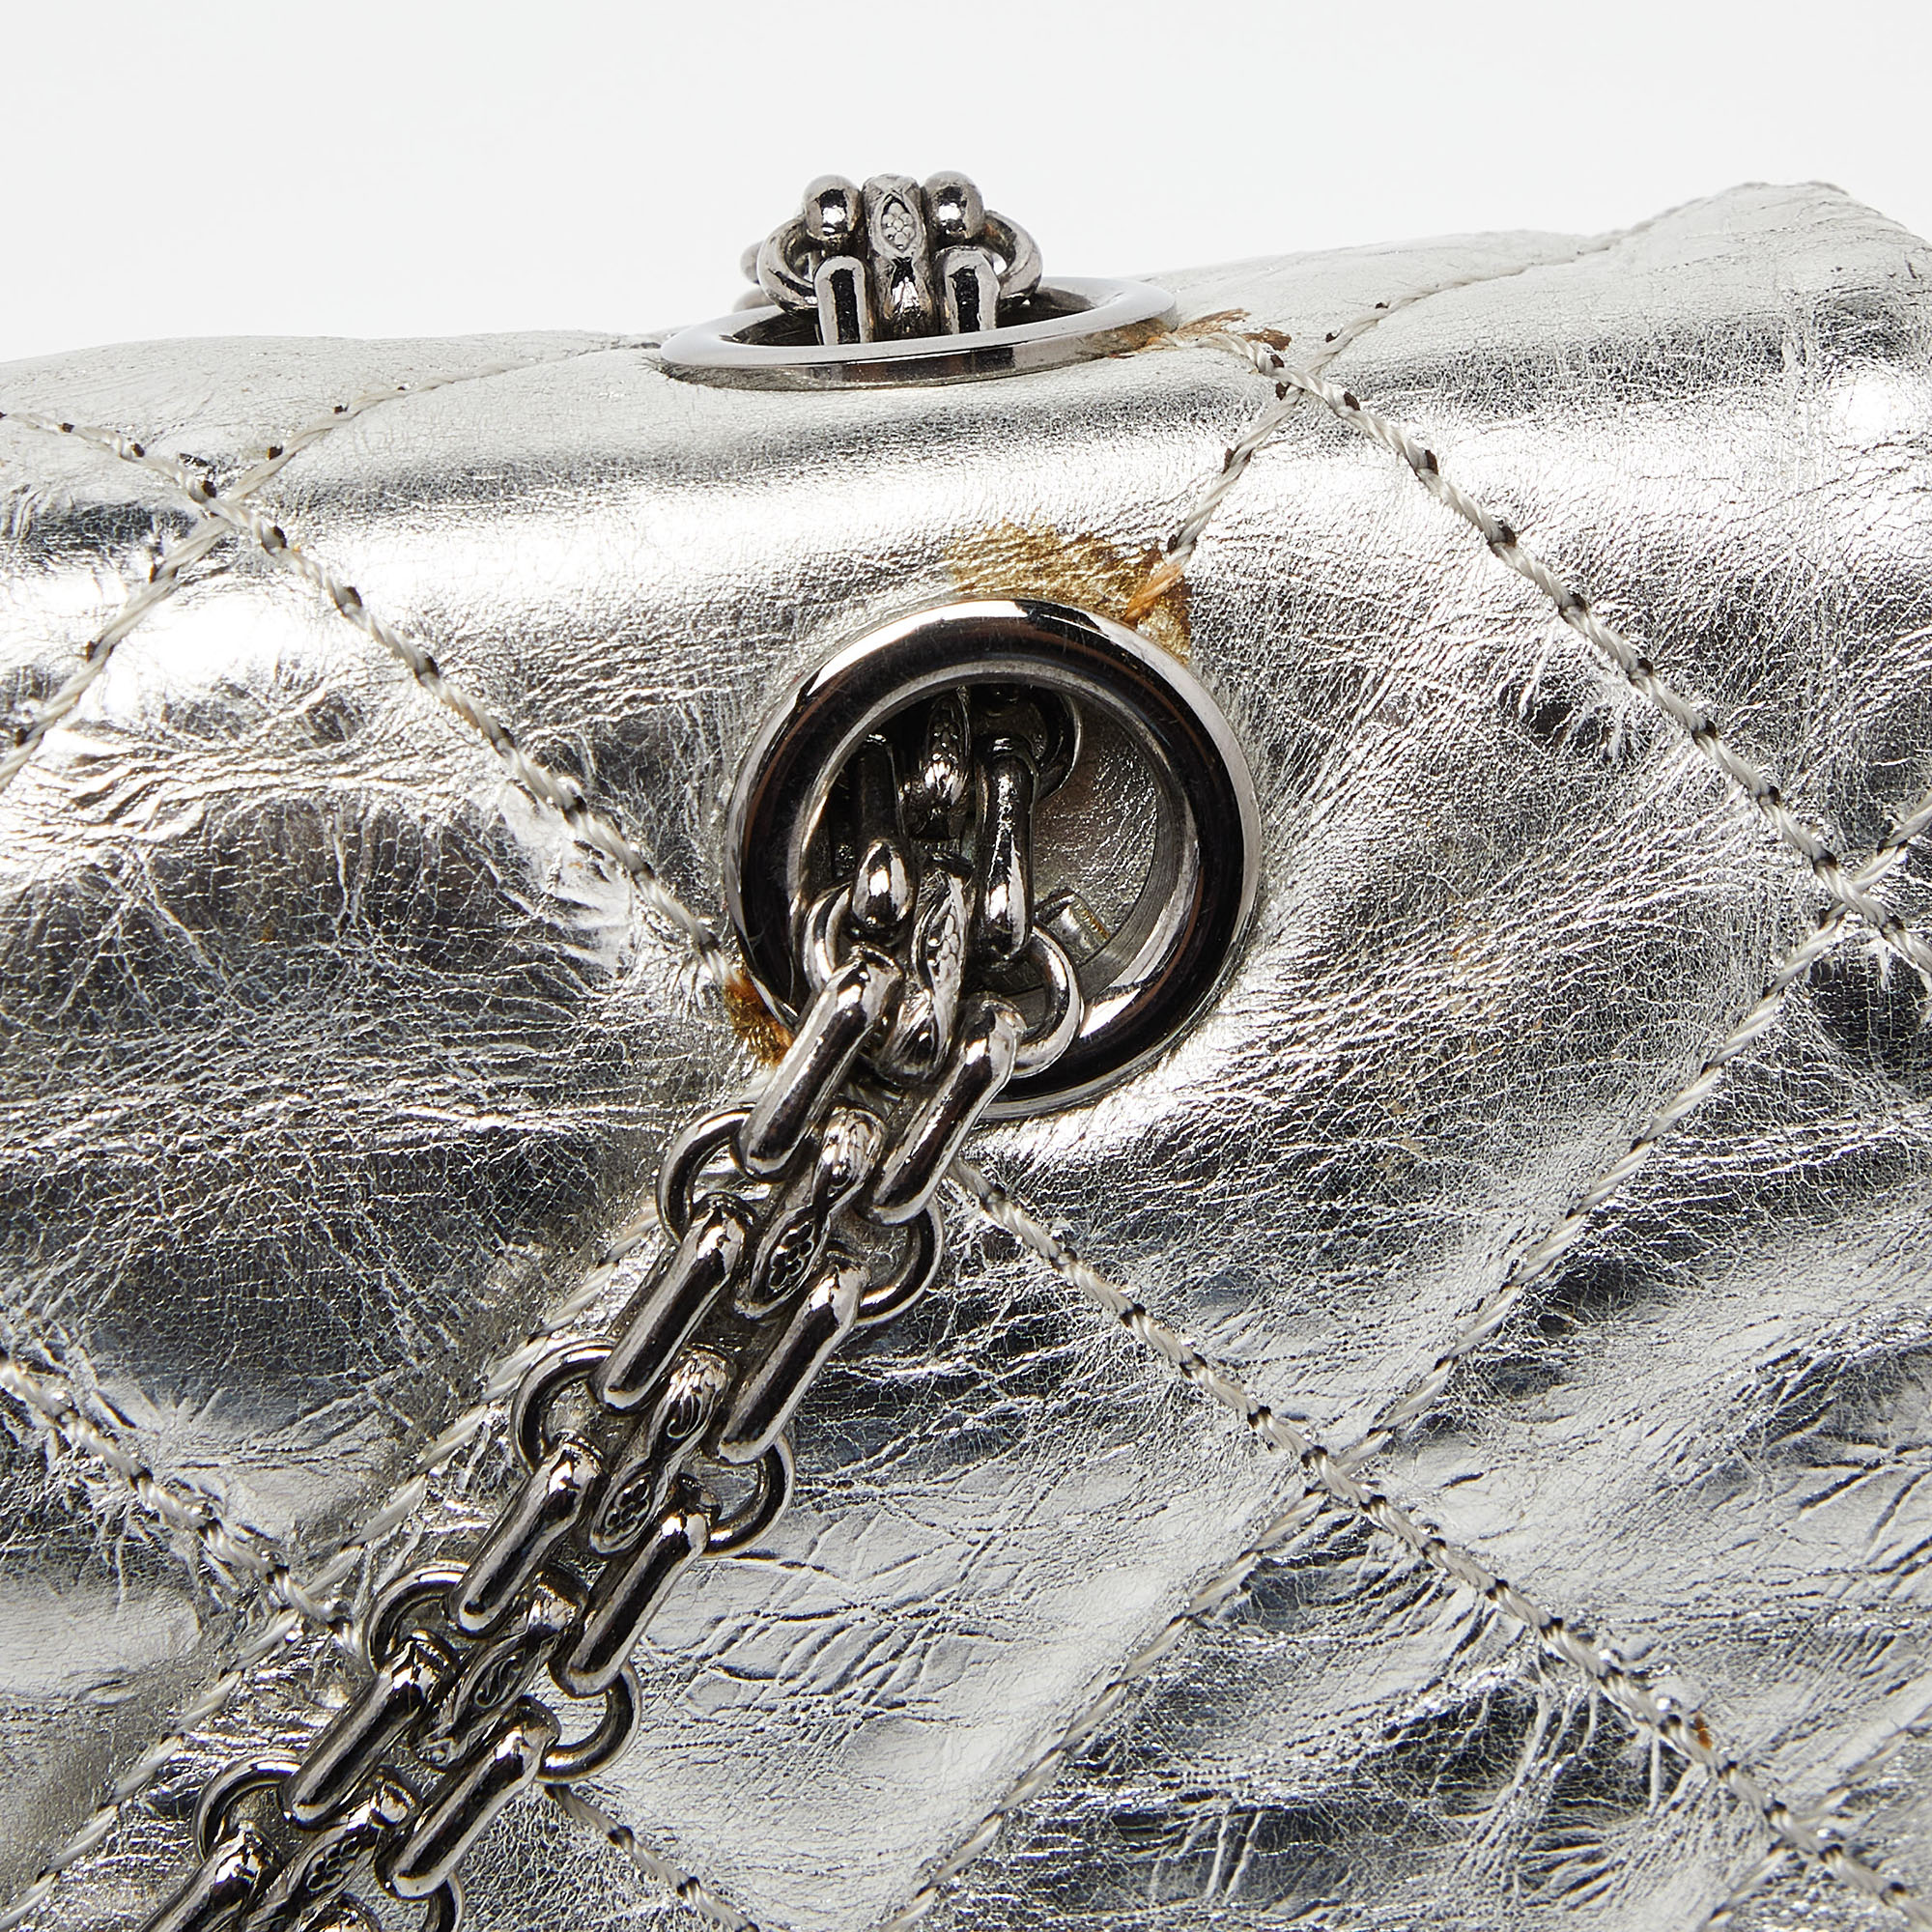 Chanel Silver Quilted Crinkled Leather Reissue 2.55 Classic 227 Double Flap Bag